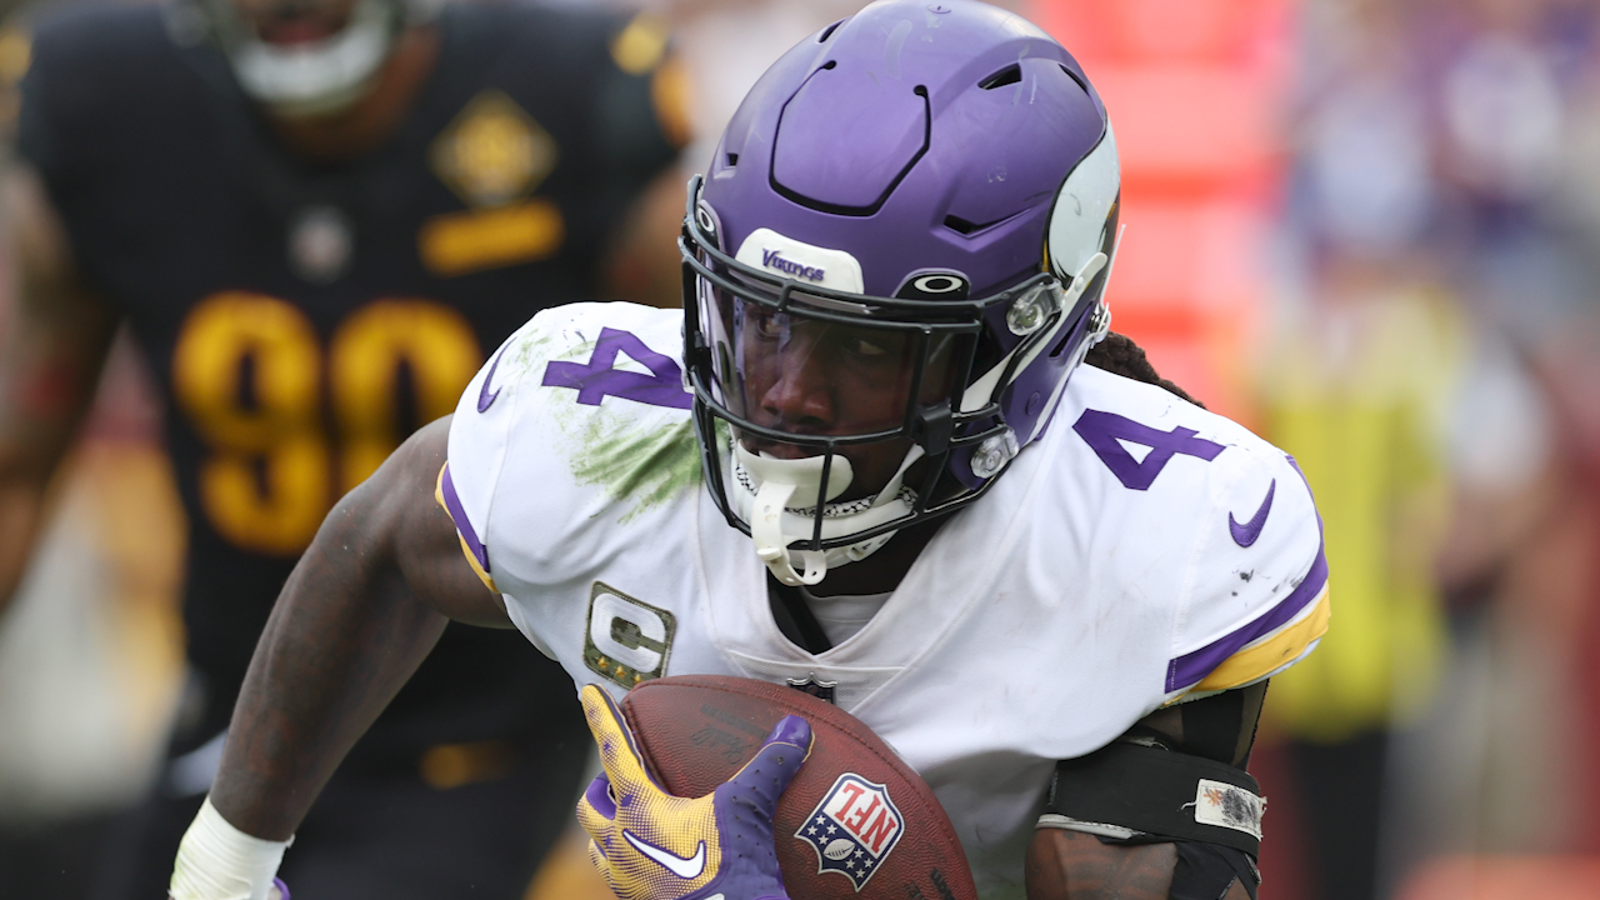 Vikings defeat Commanders 20-17 after Dalvin Cook and Kirk Cousins lead fourth-quarter comeback